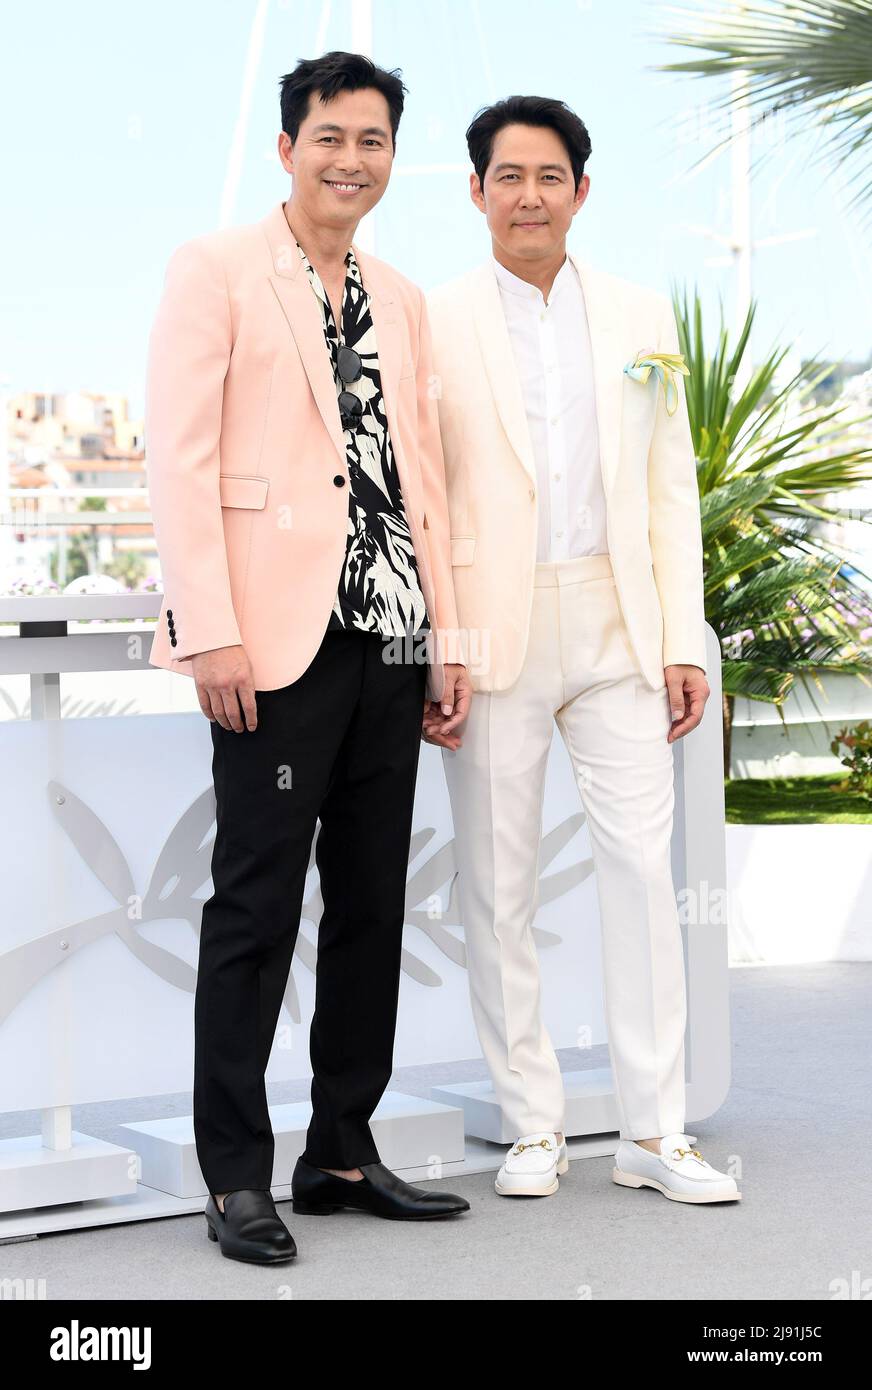 Cannes, France. 19th May, 2022. South Korean actors Jung Woo-Sung and Lee Jung-Jae attend the photo call for The Hunt at Palais des Festivals at the 75th Cannes Film Festival, France on Thursday, May 19, 2022. Photo by Rune Hellestad/ Credit: UPI/Alamy Live News Stock Photo